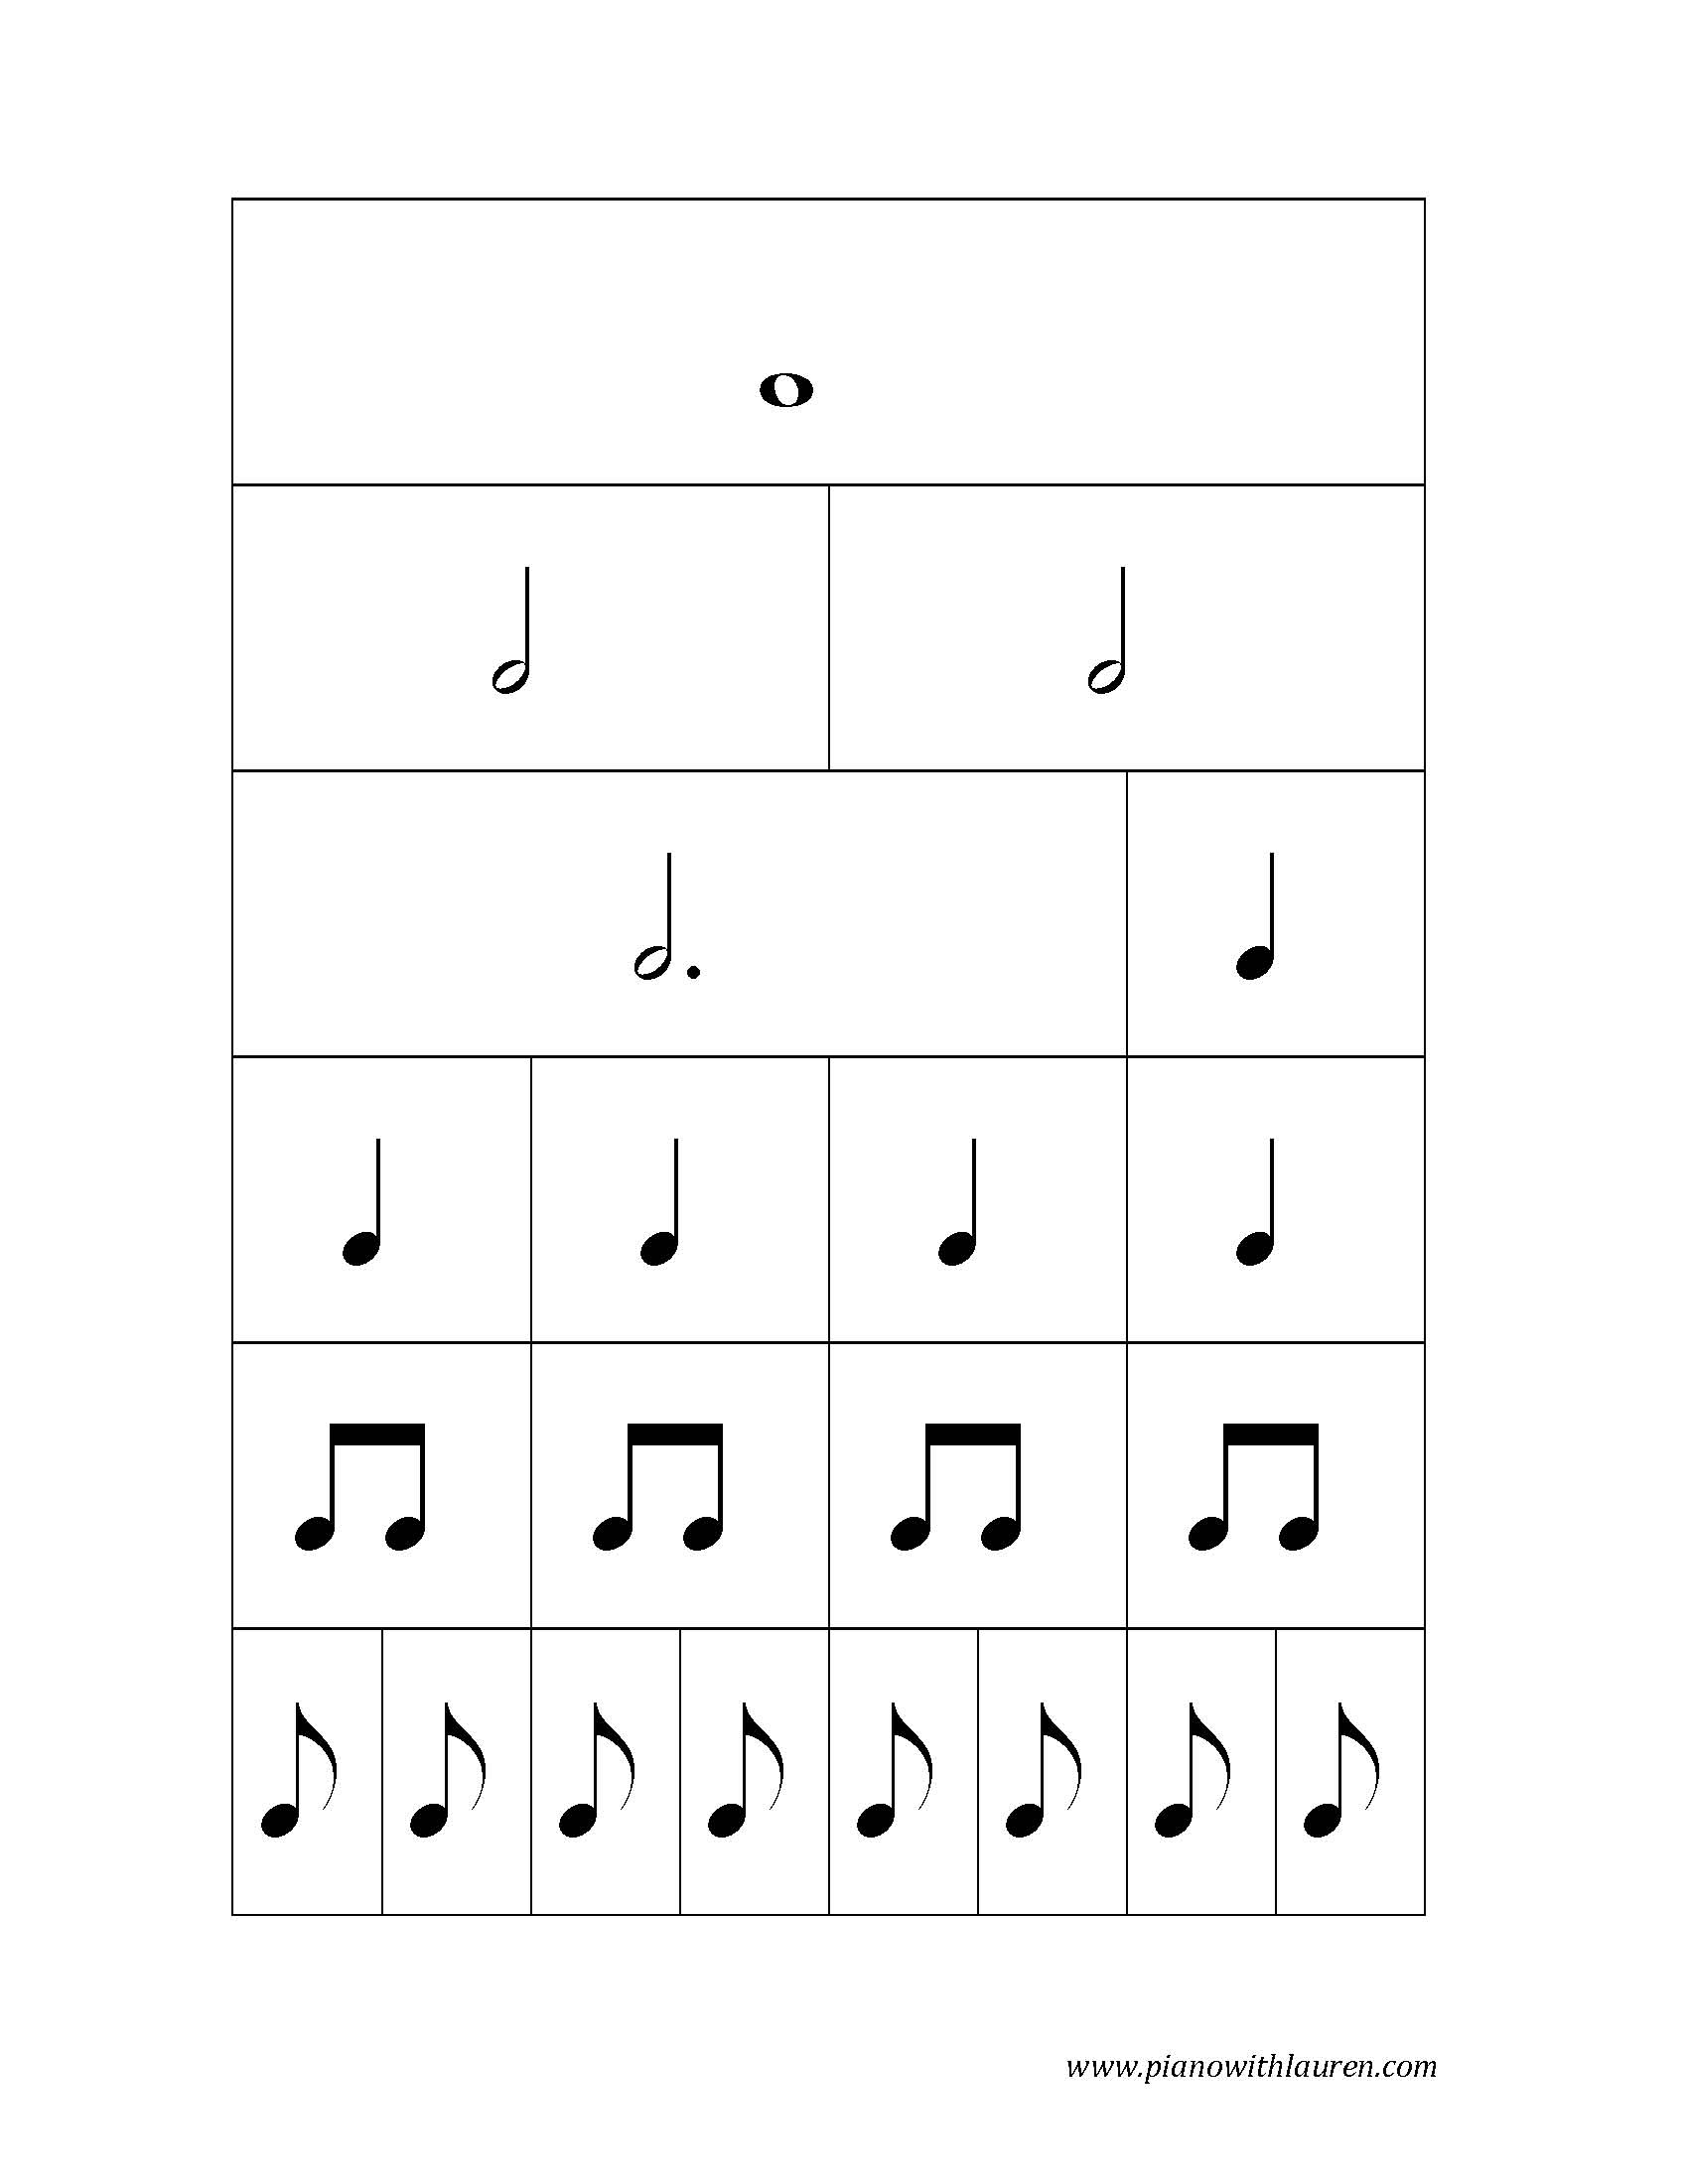 Note Values Chart